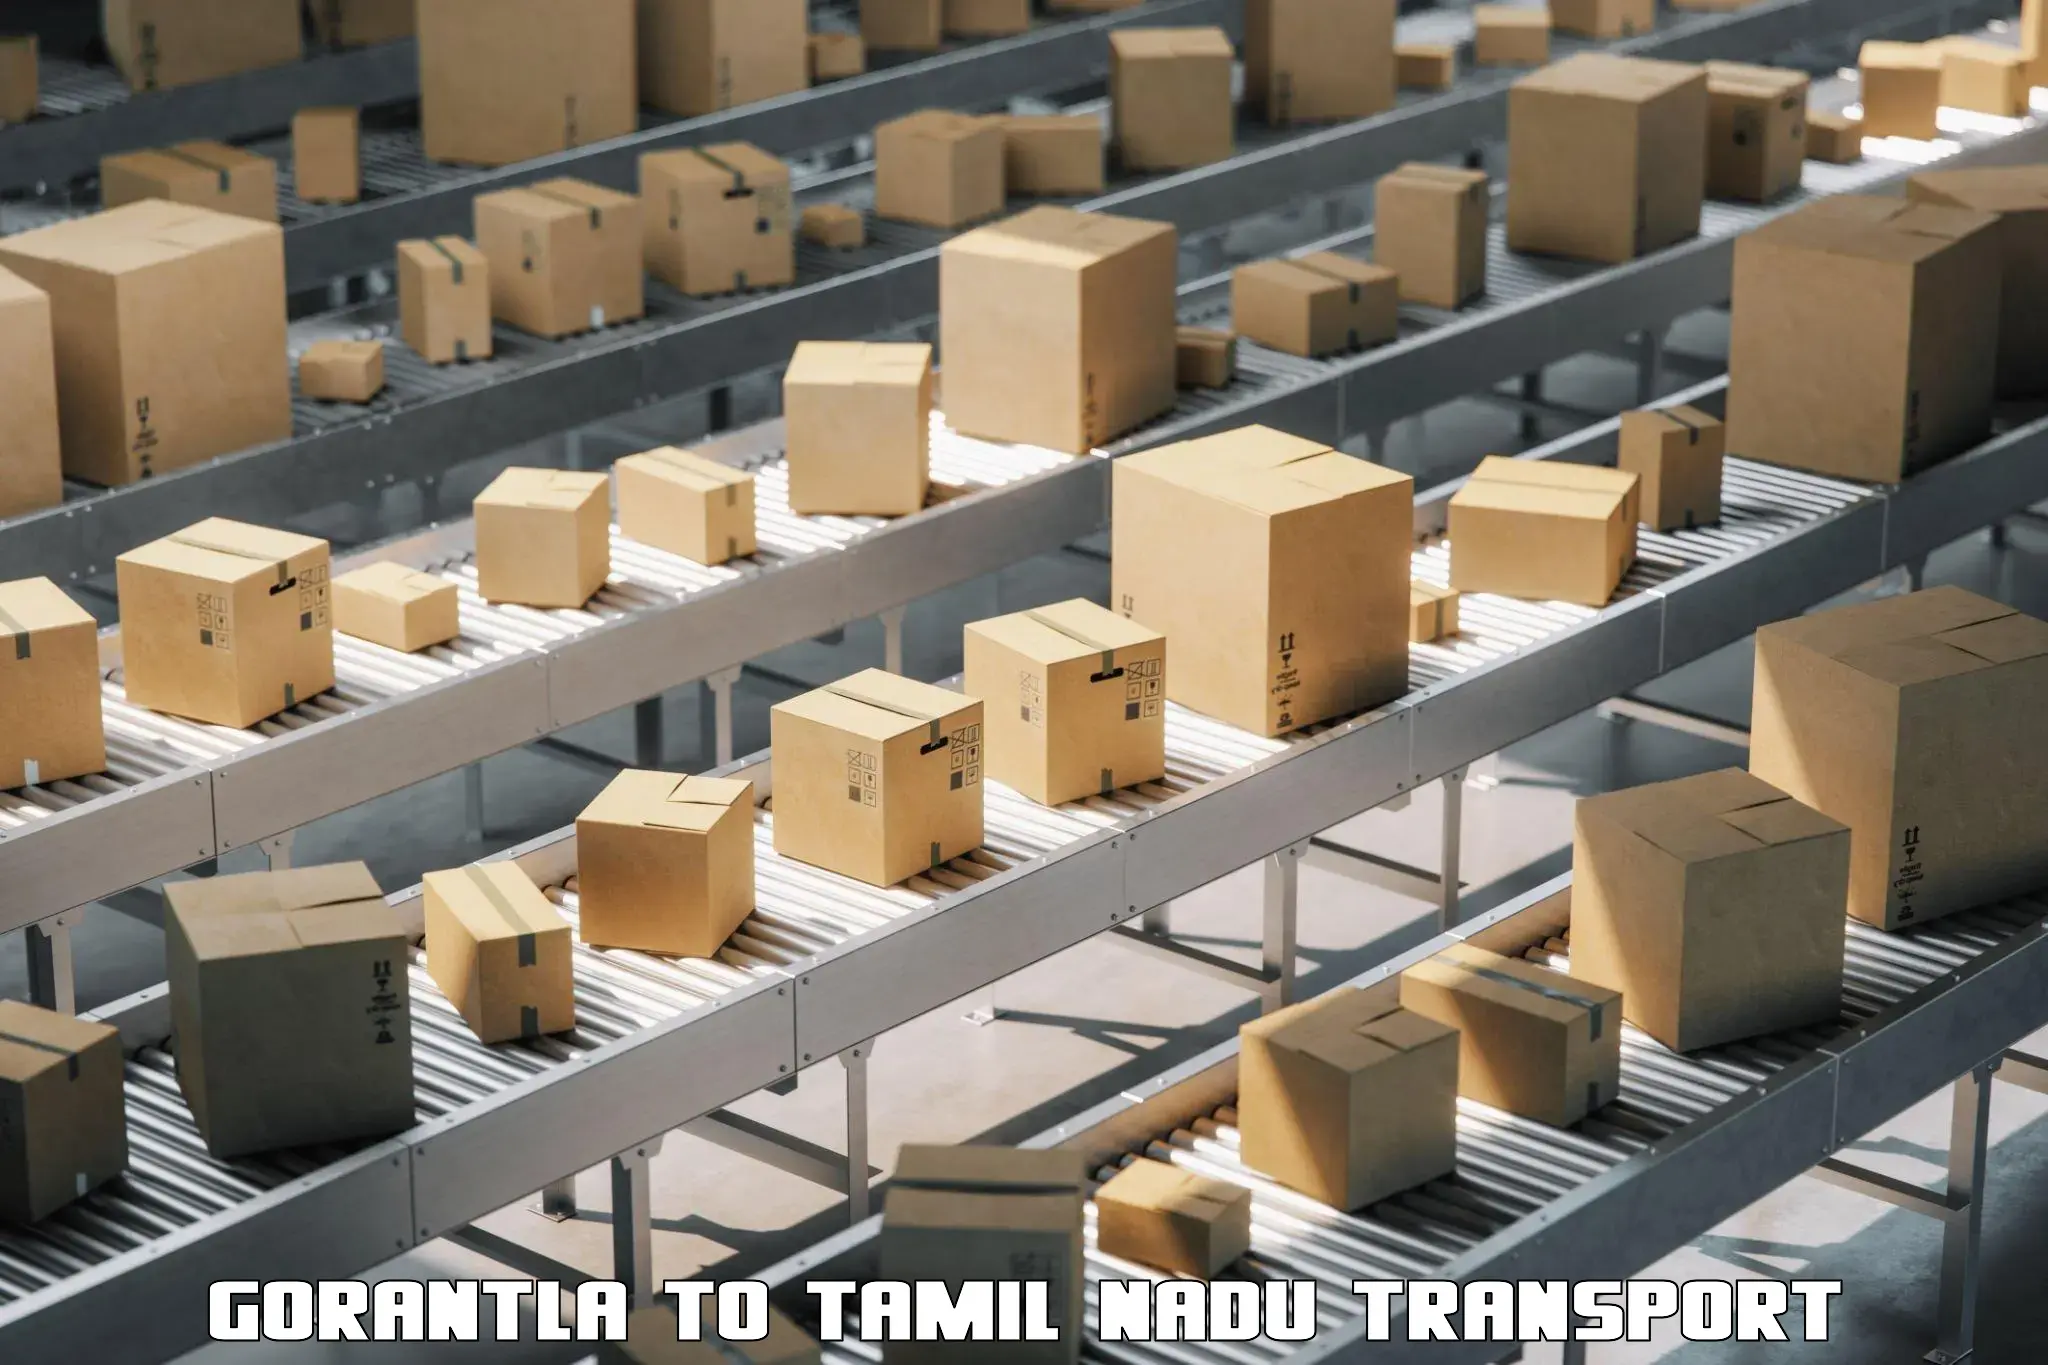 Parcel transport services Gorantla to Vellore Institute of Technology